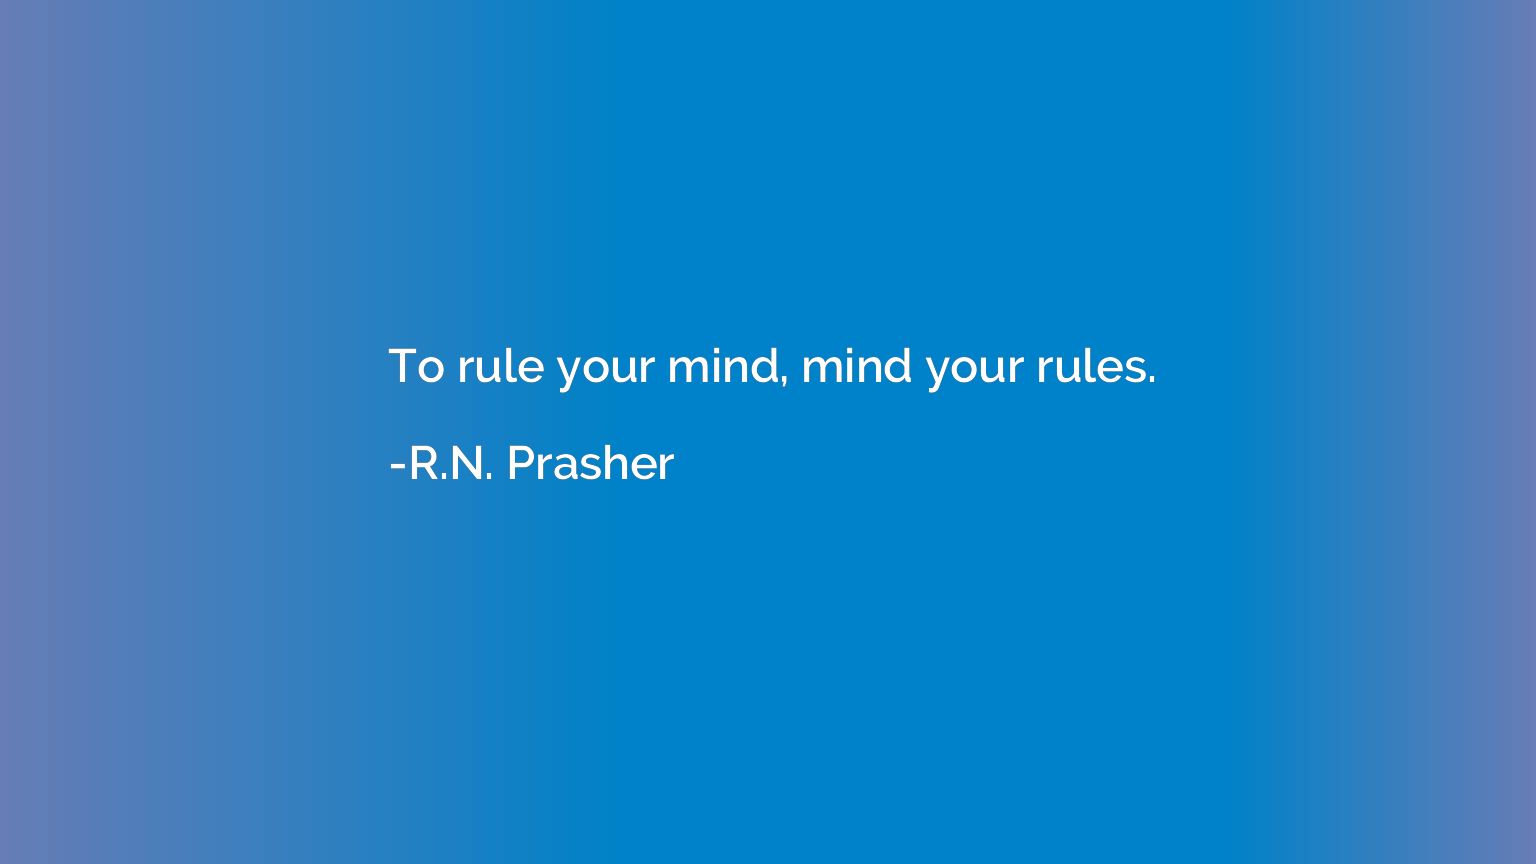 To rule your mind, mind your rules.